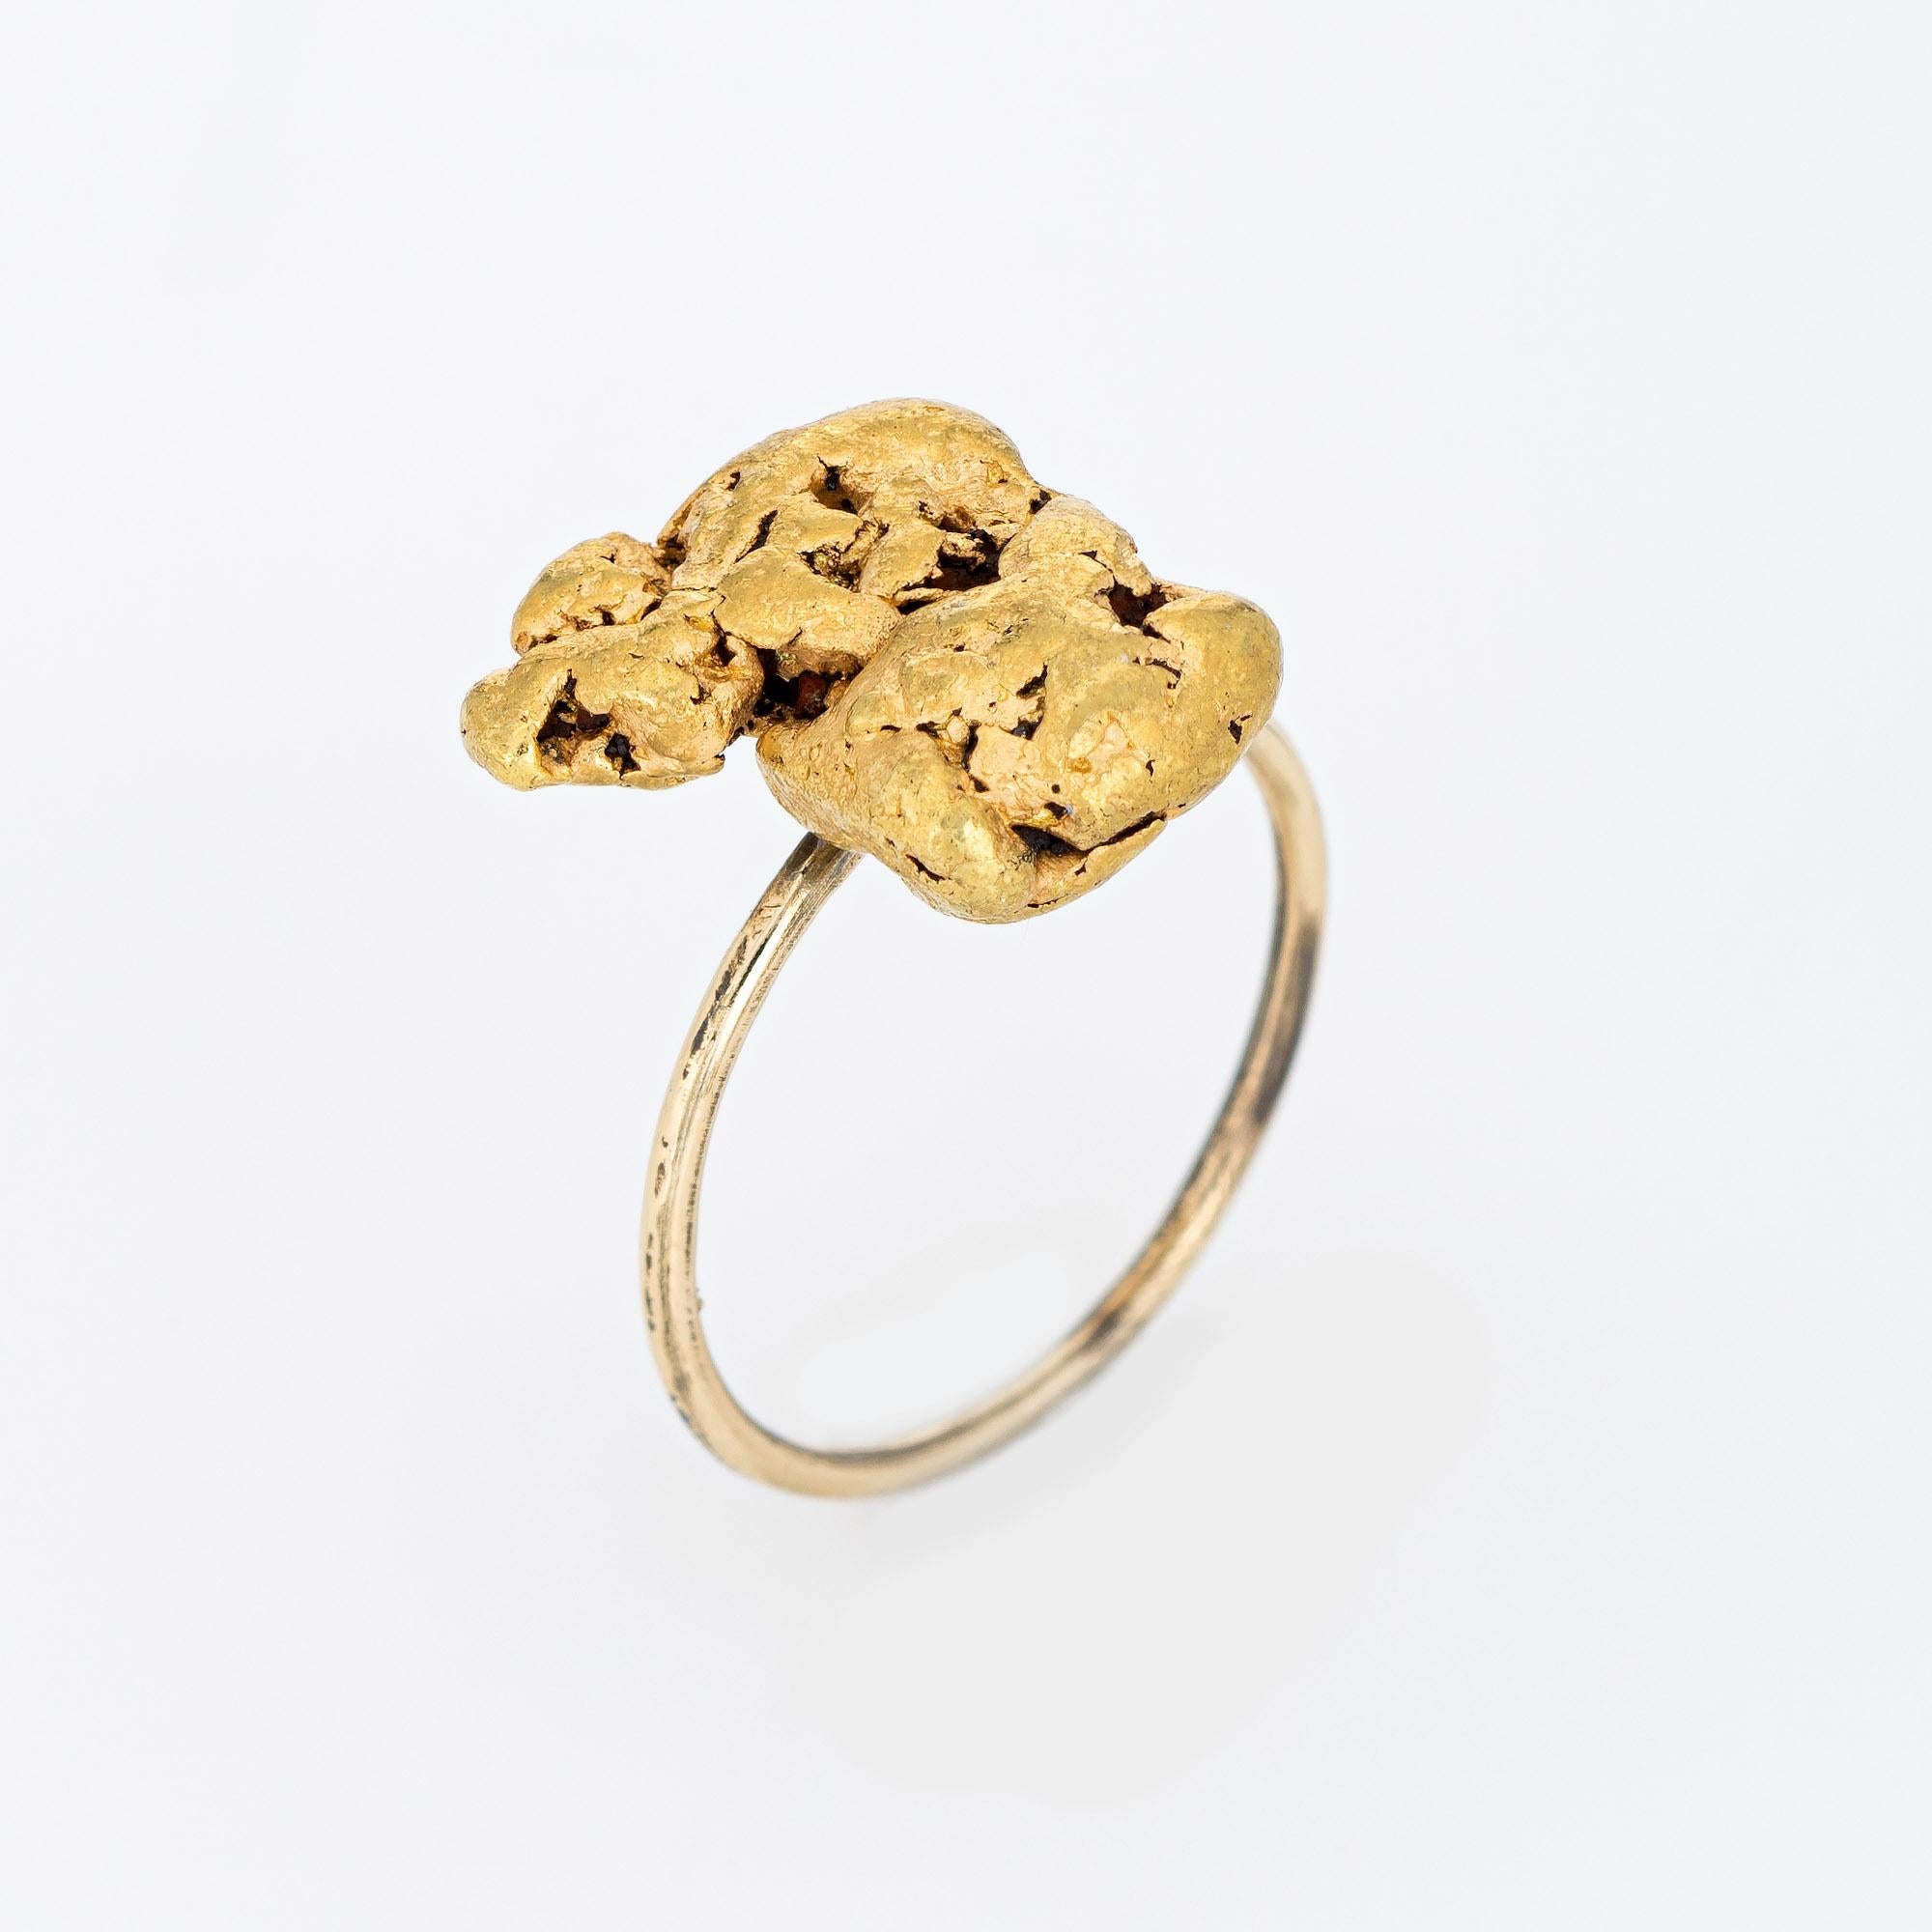 Originally an antique Victorian era stick pin (circa 1880s to 1900s), the natural gold nugget is crafted in 14 karat yellow gold.

The ring is mounted with the original stick pin. Our jeweler rounded the stick pin into a slim band for the finger.